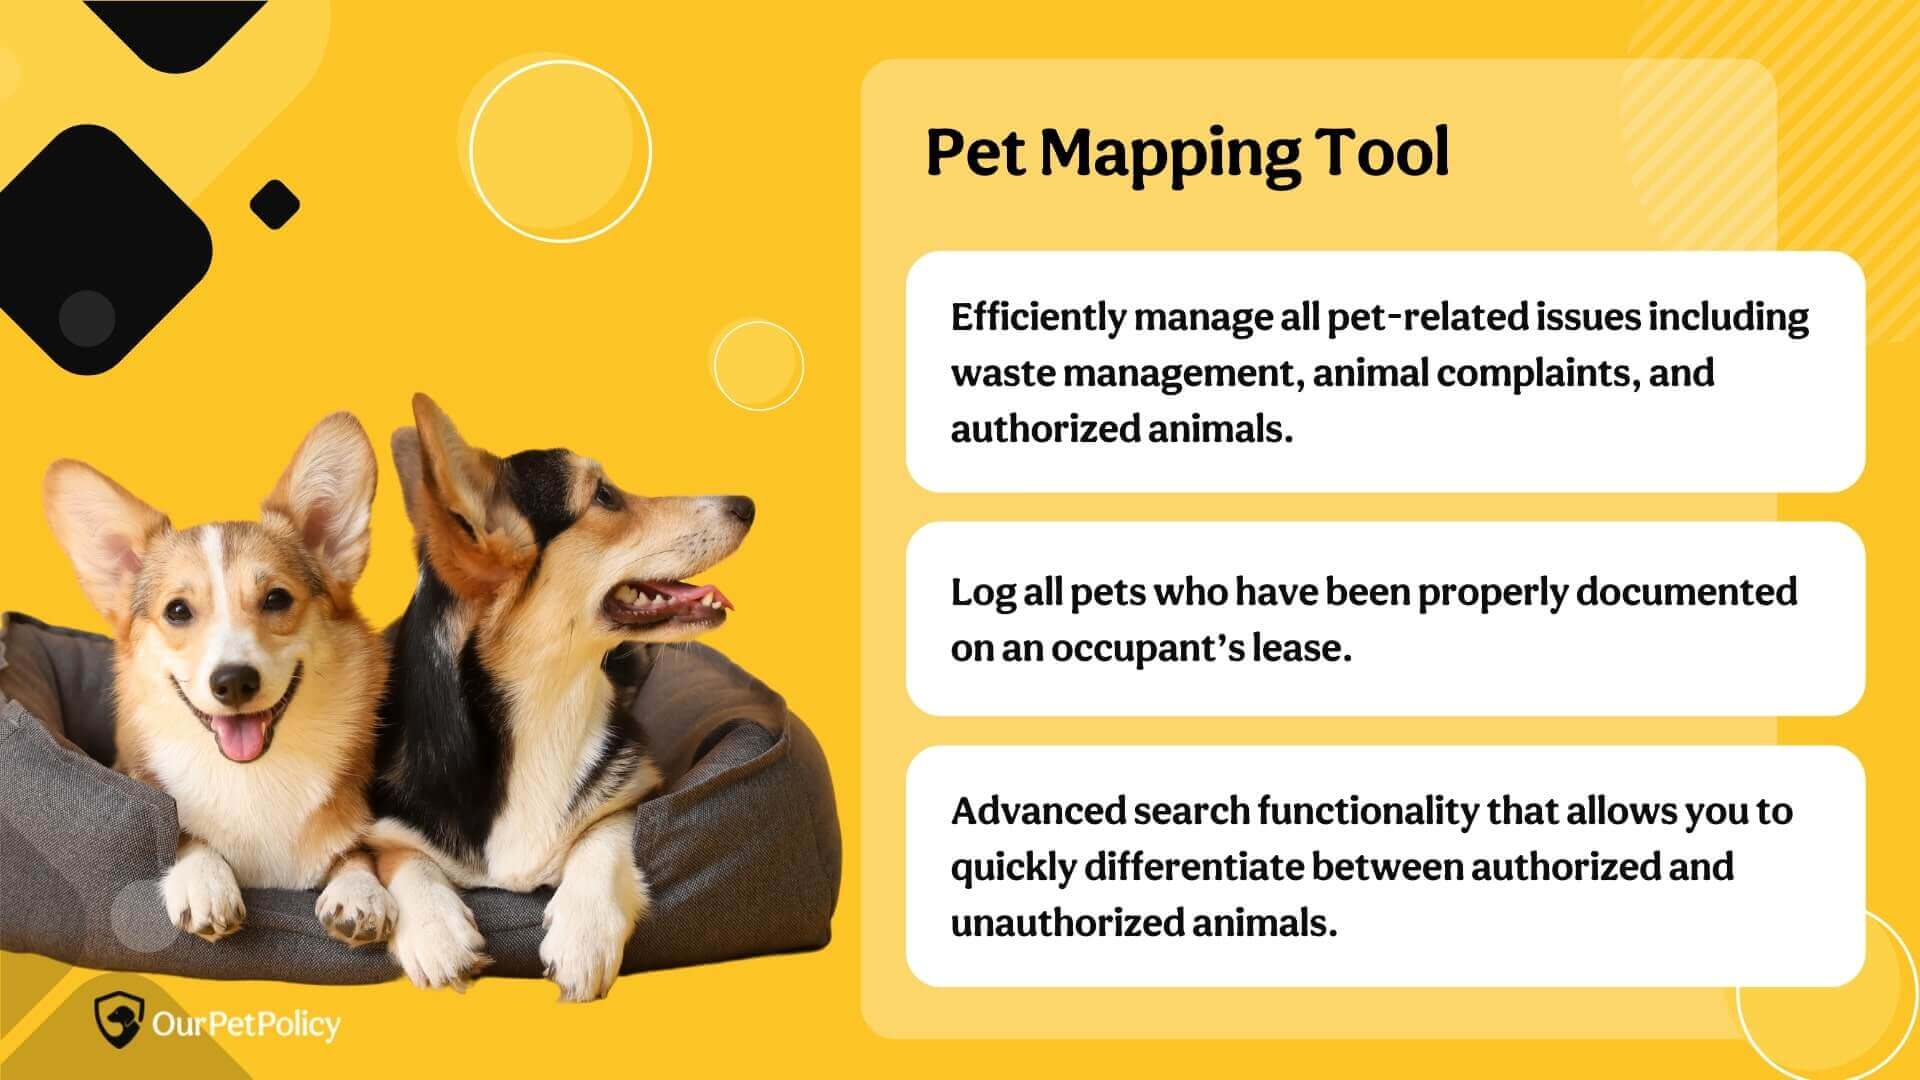 Pet mapping tool for pet-related issues